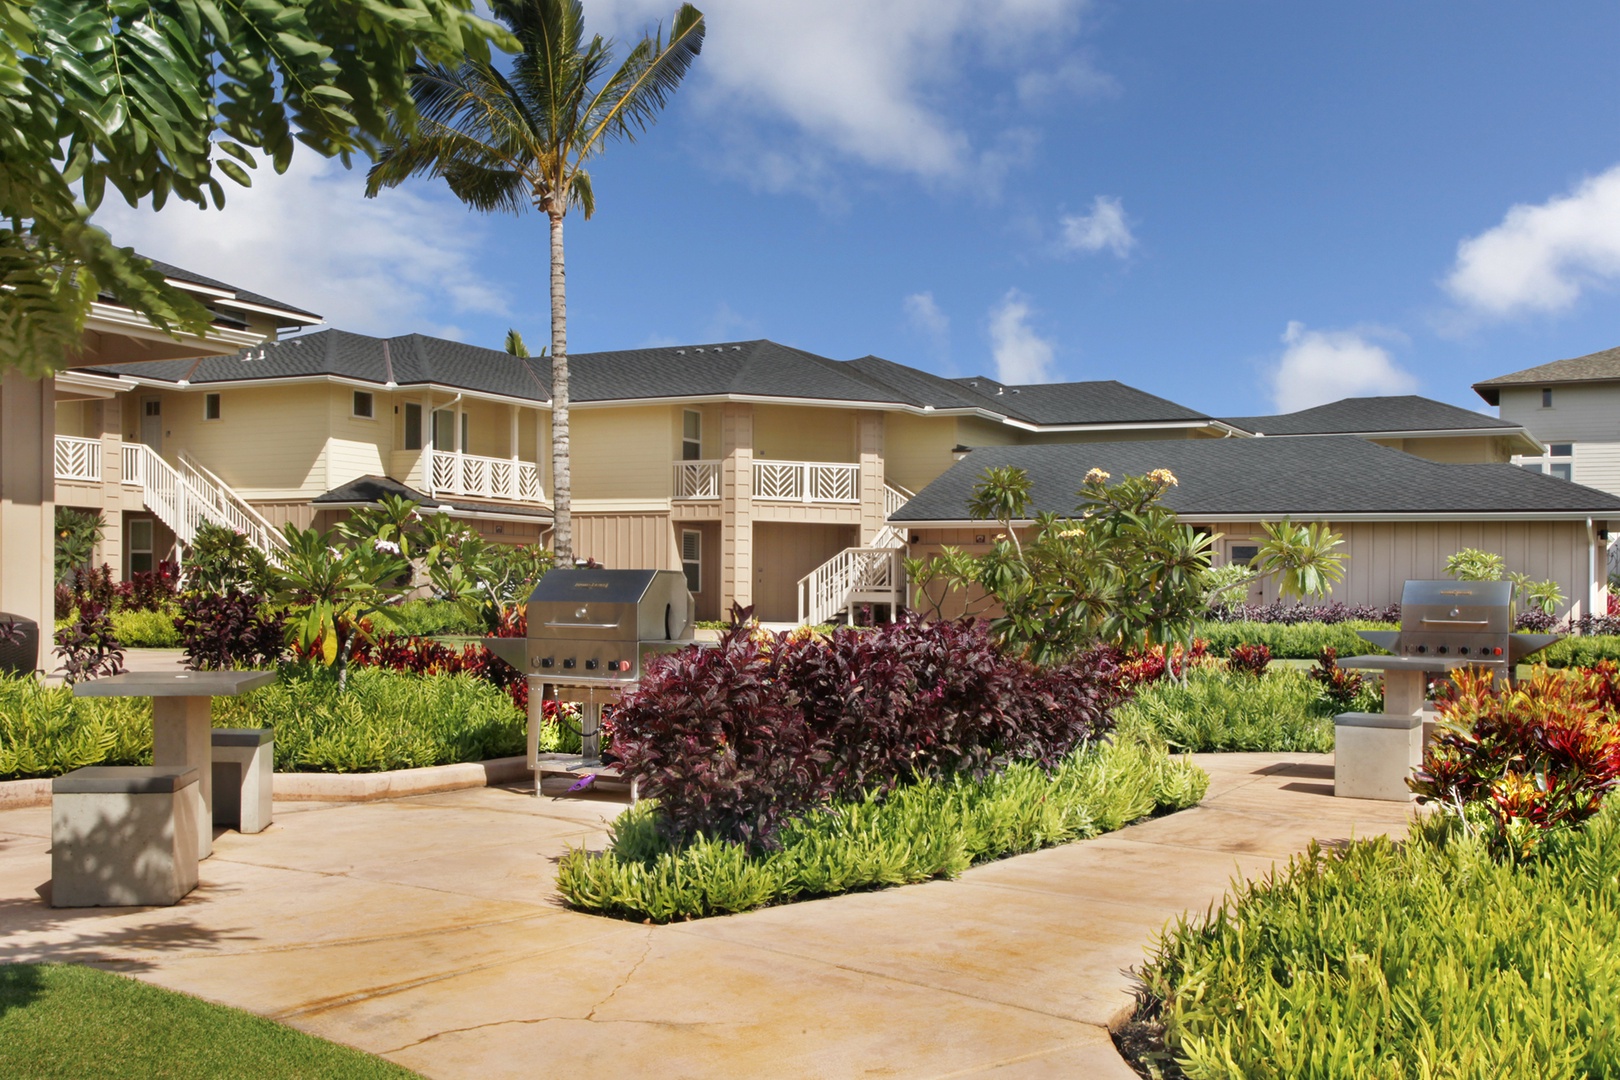 Koloa Vacation Rentals, Pili Mai 6K - Exterior with shared BBQs throughout the property